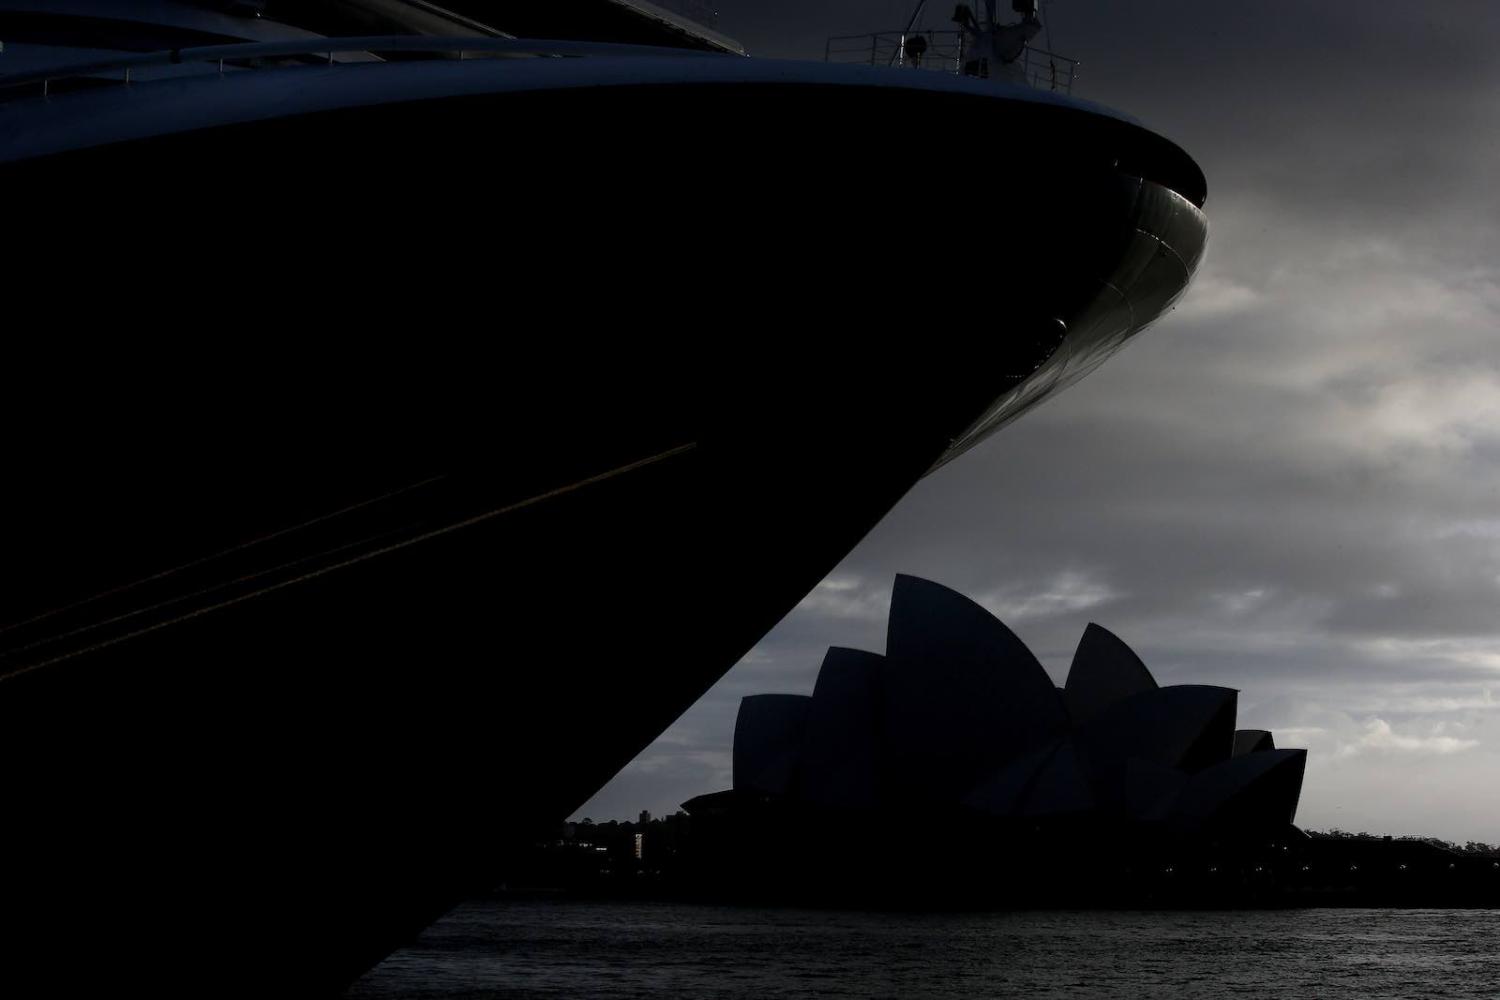 A cruise ship docks in Sydney at the weekend. Australia is one 72 countries to so far impose coronavirus travel restrictions (Photo: Lisa Maree Williams/Getty Images)